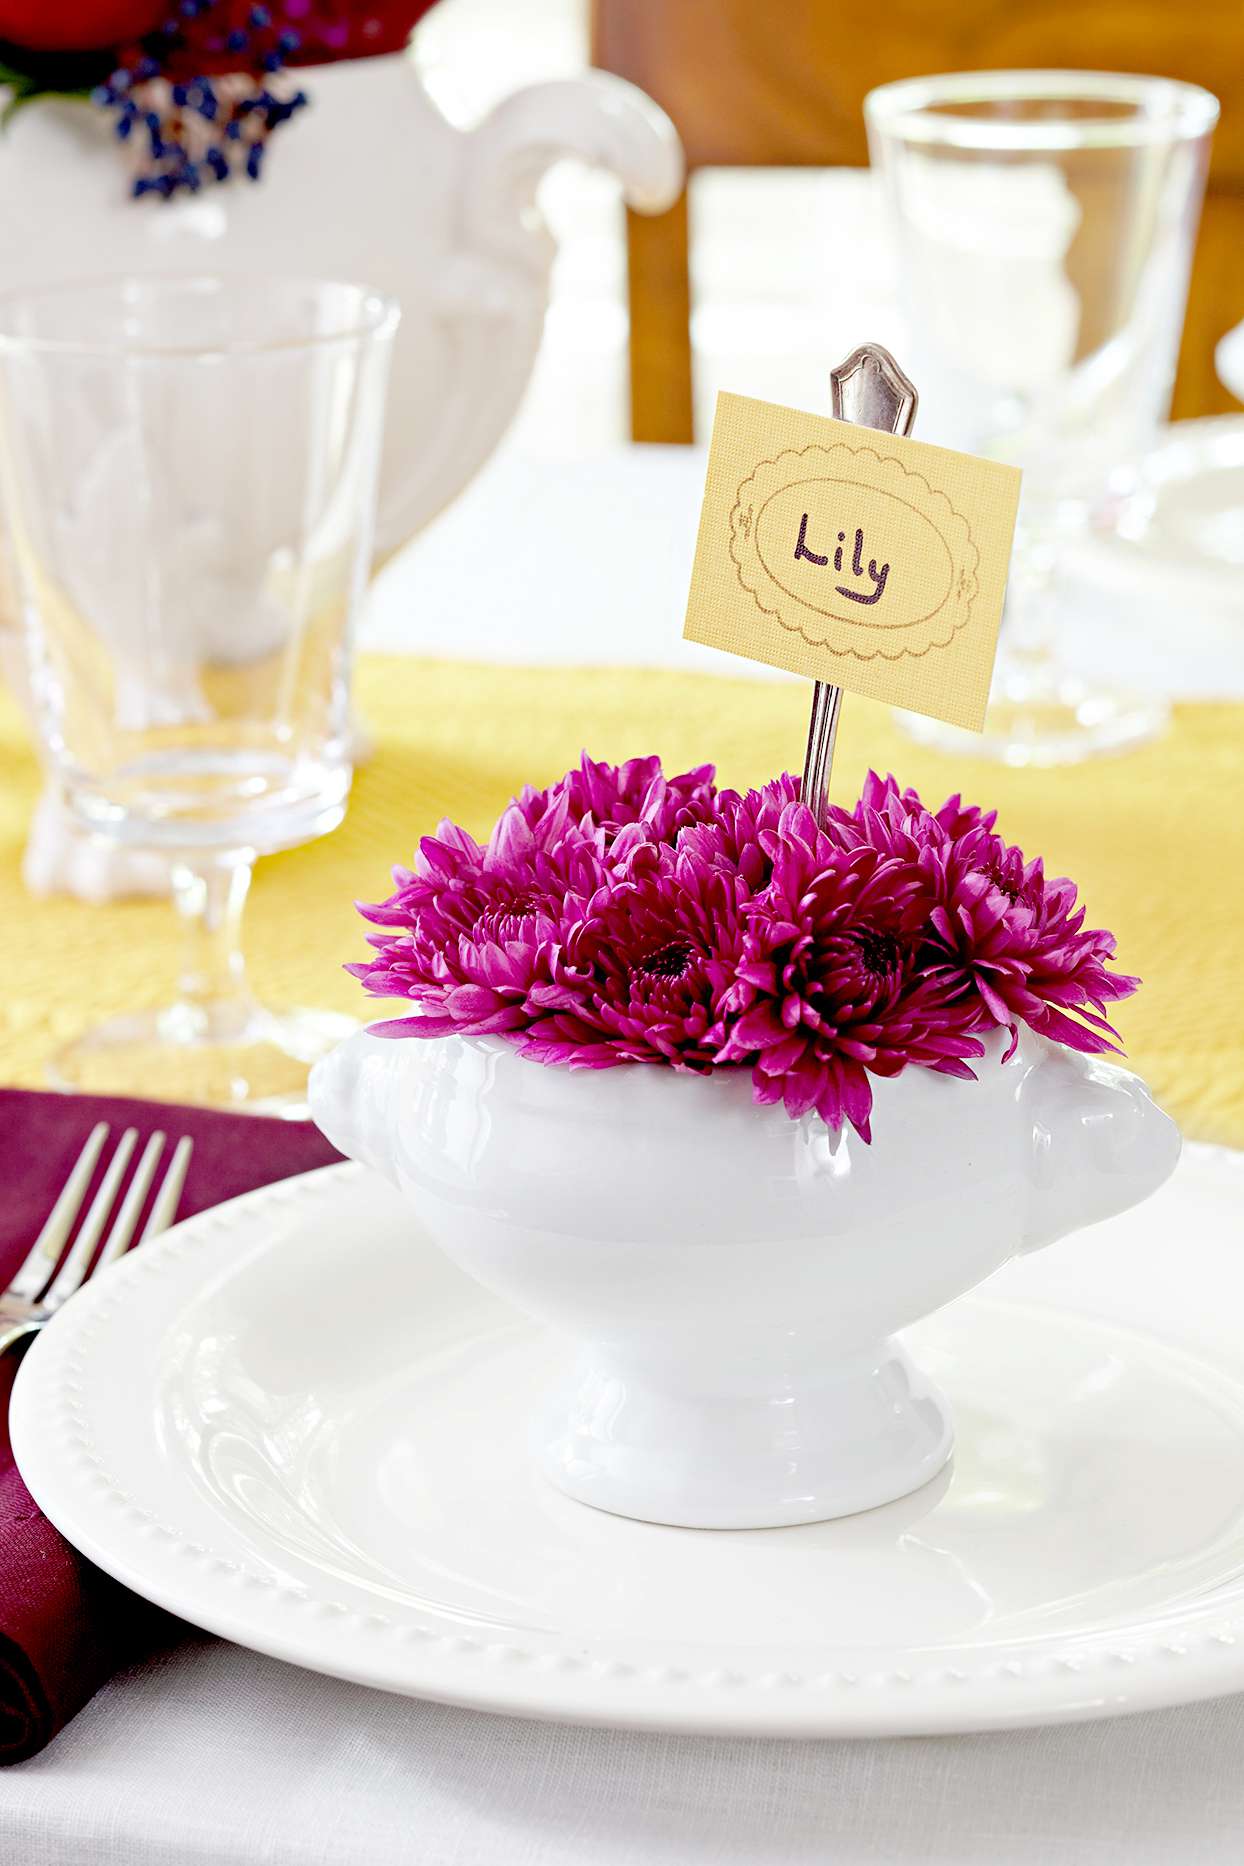 Place setting with purple flowers in ceramic vase